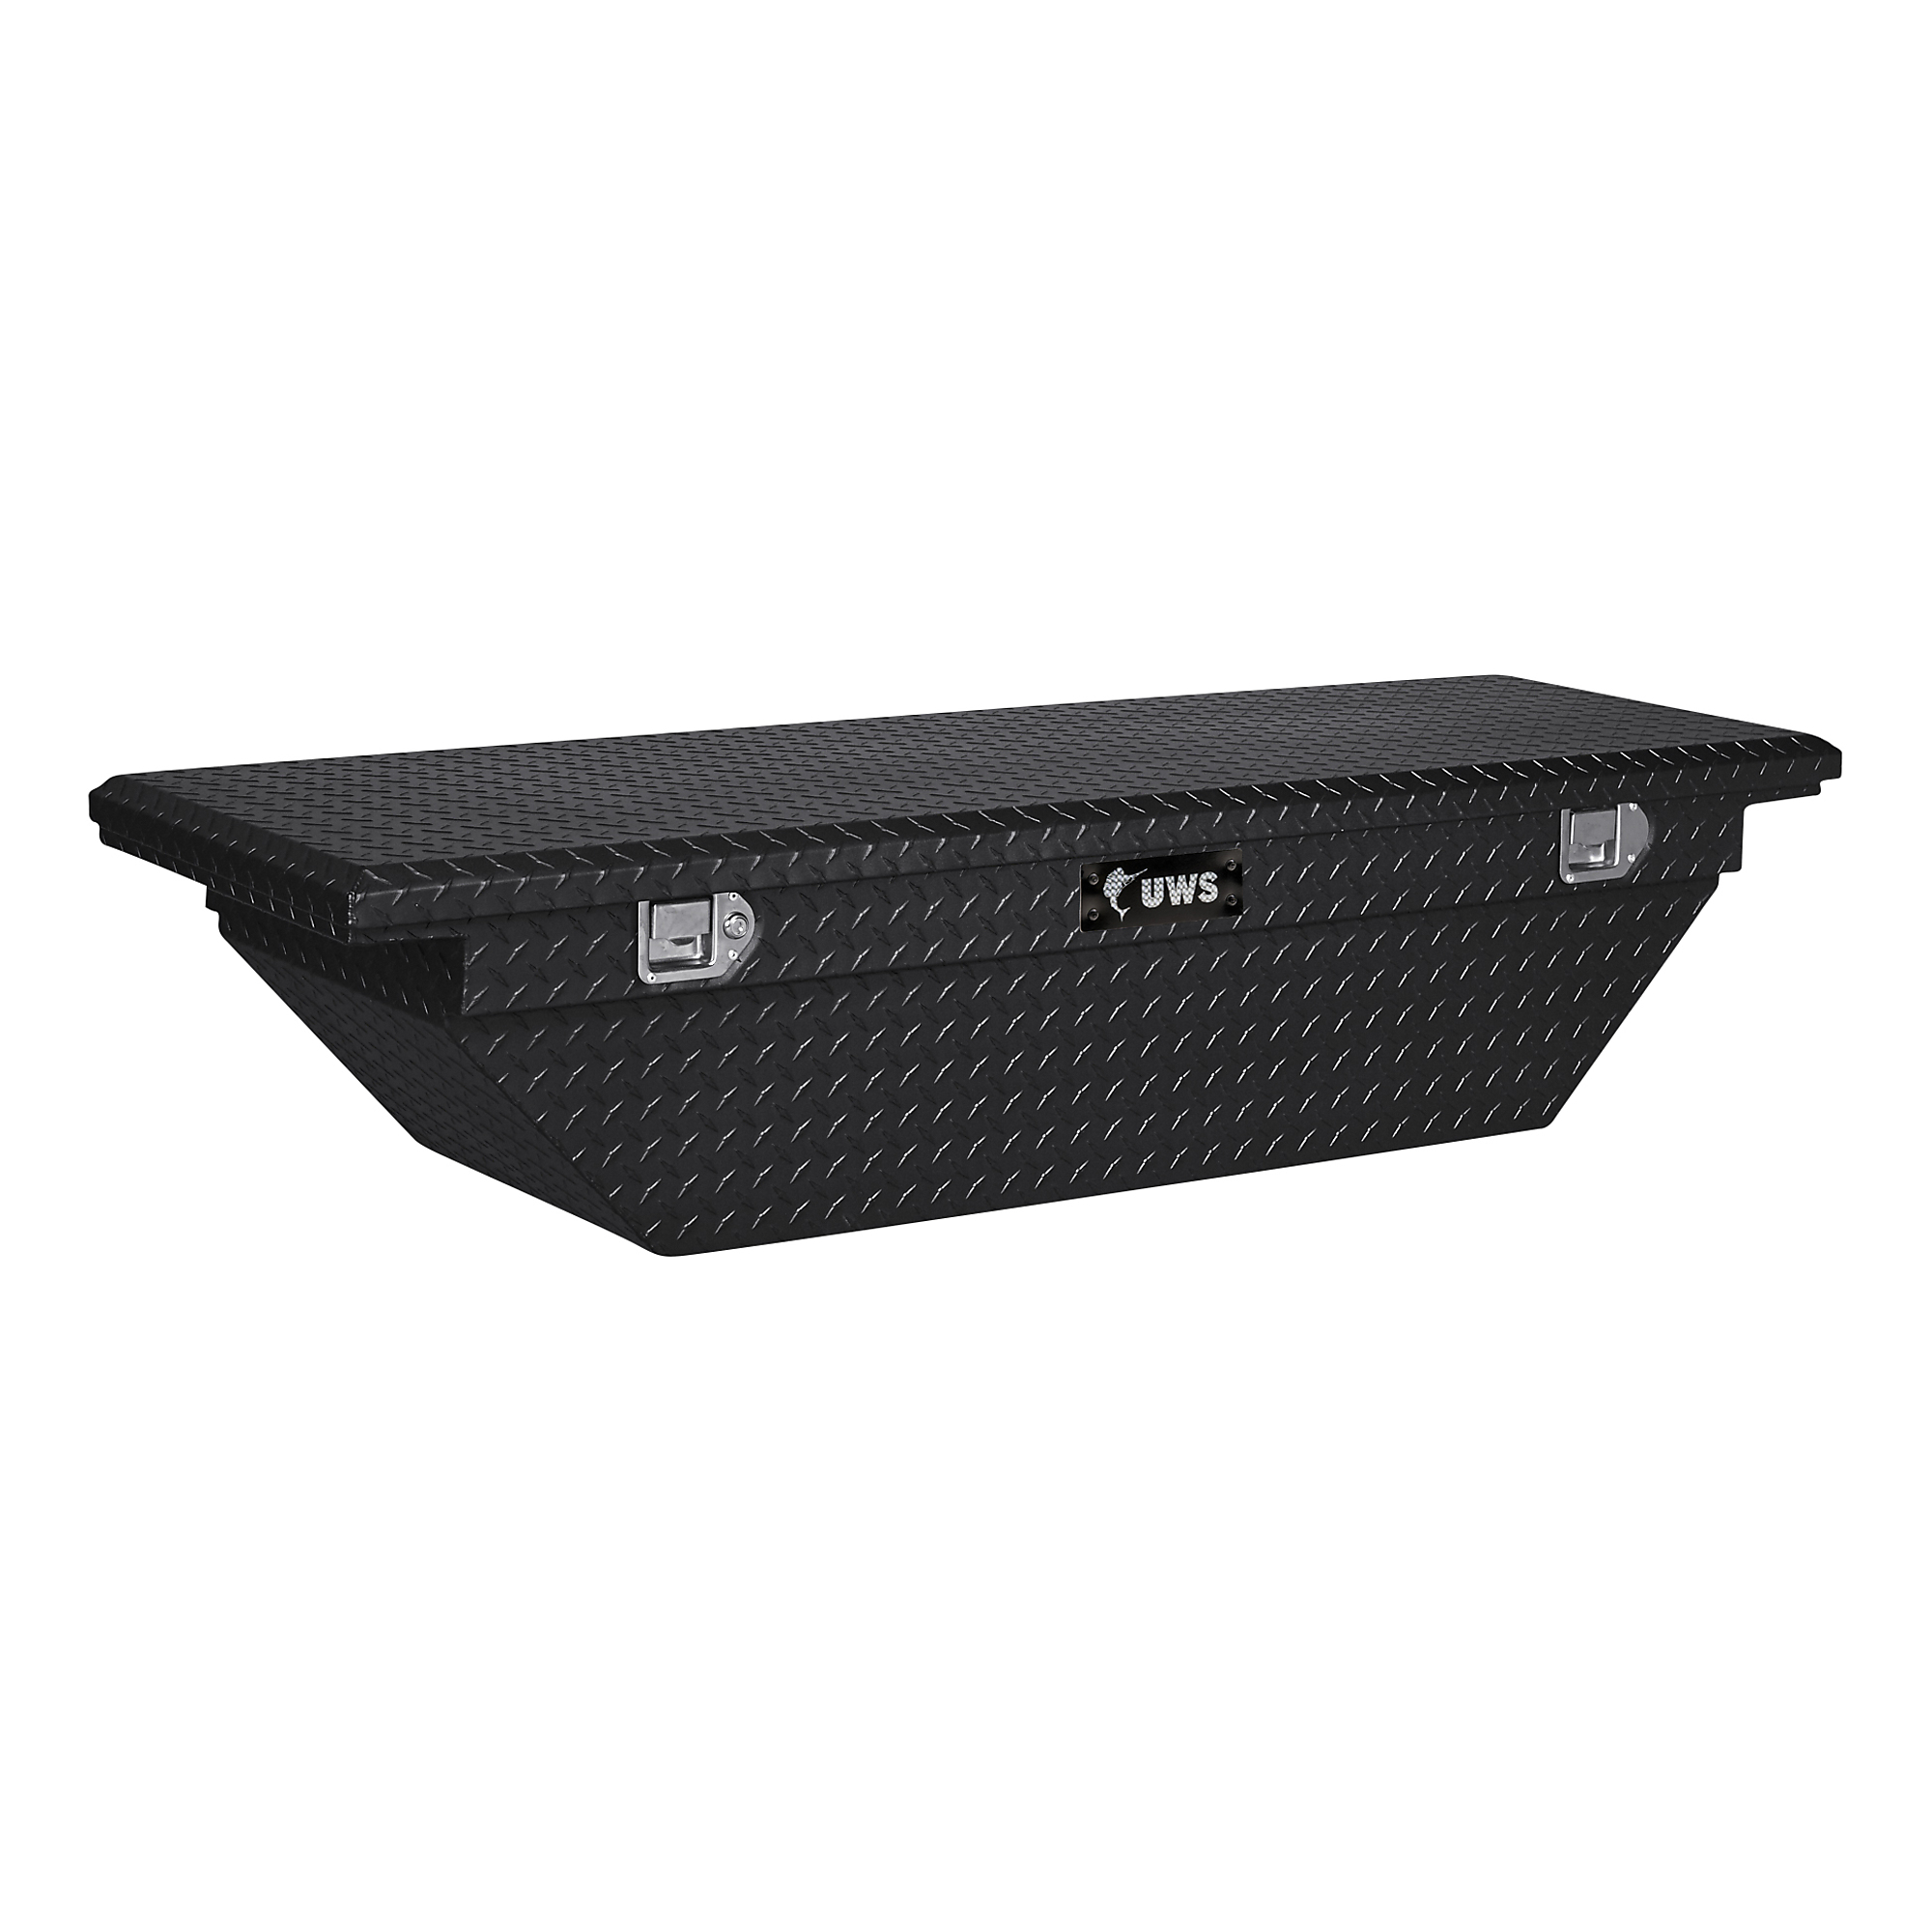 UWS, 69Inch Angled Crossover Truck Tool Box, Width 69.875 in, Material Aluminum, Color Finish Gloss Black, Model EC10432